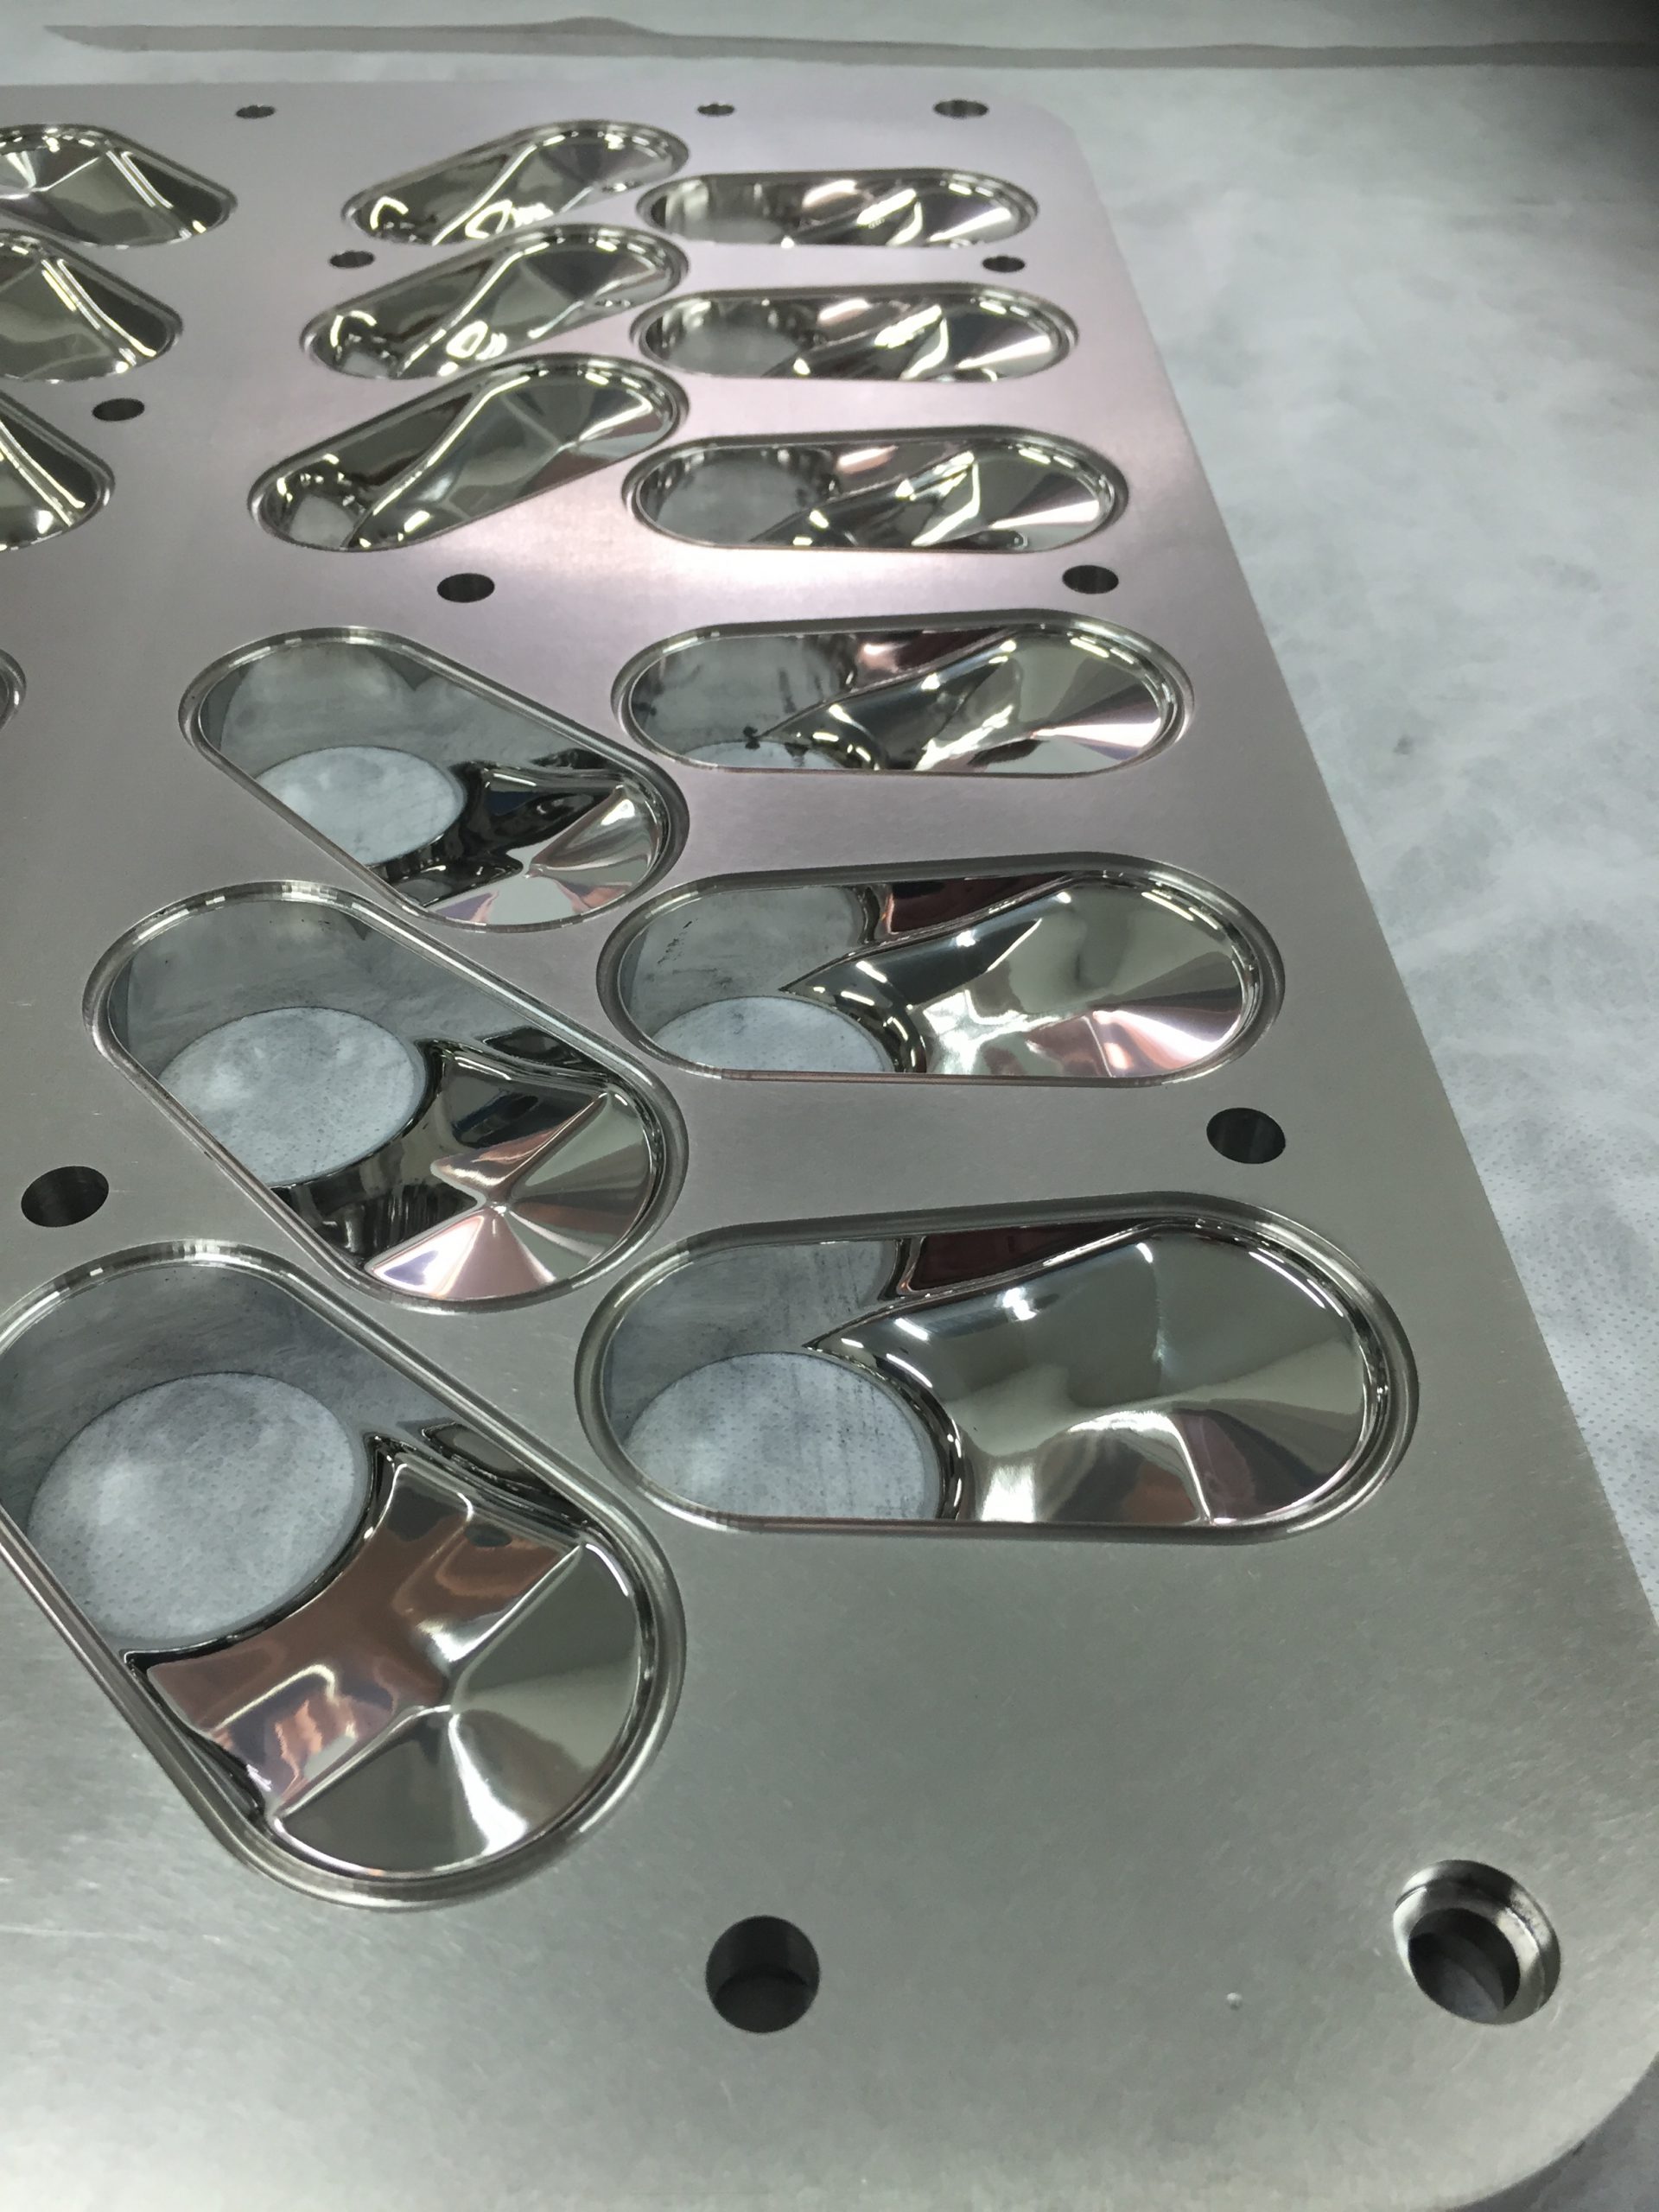 Machined aluminum die polished